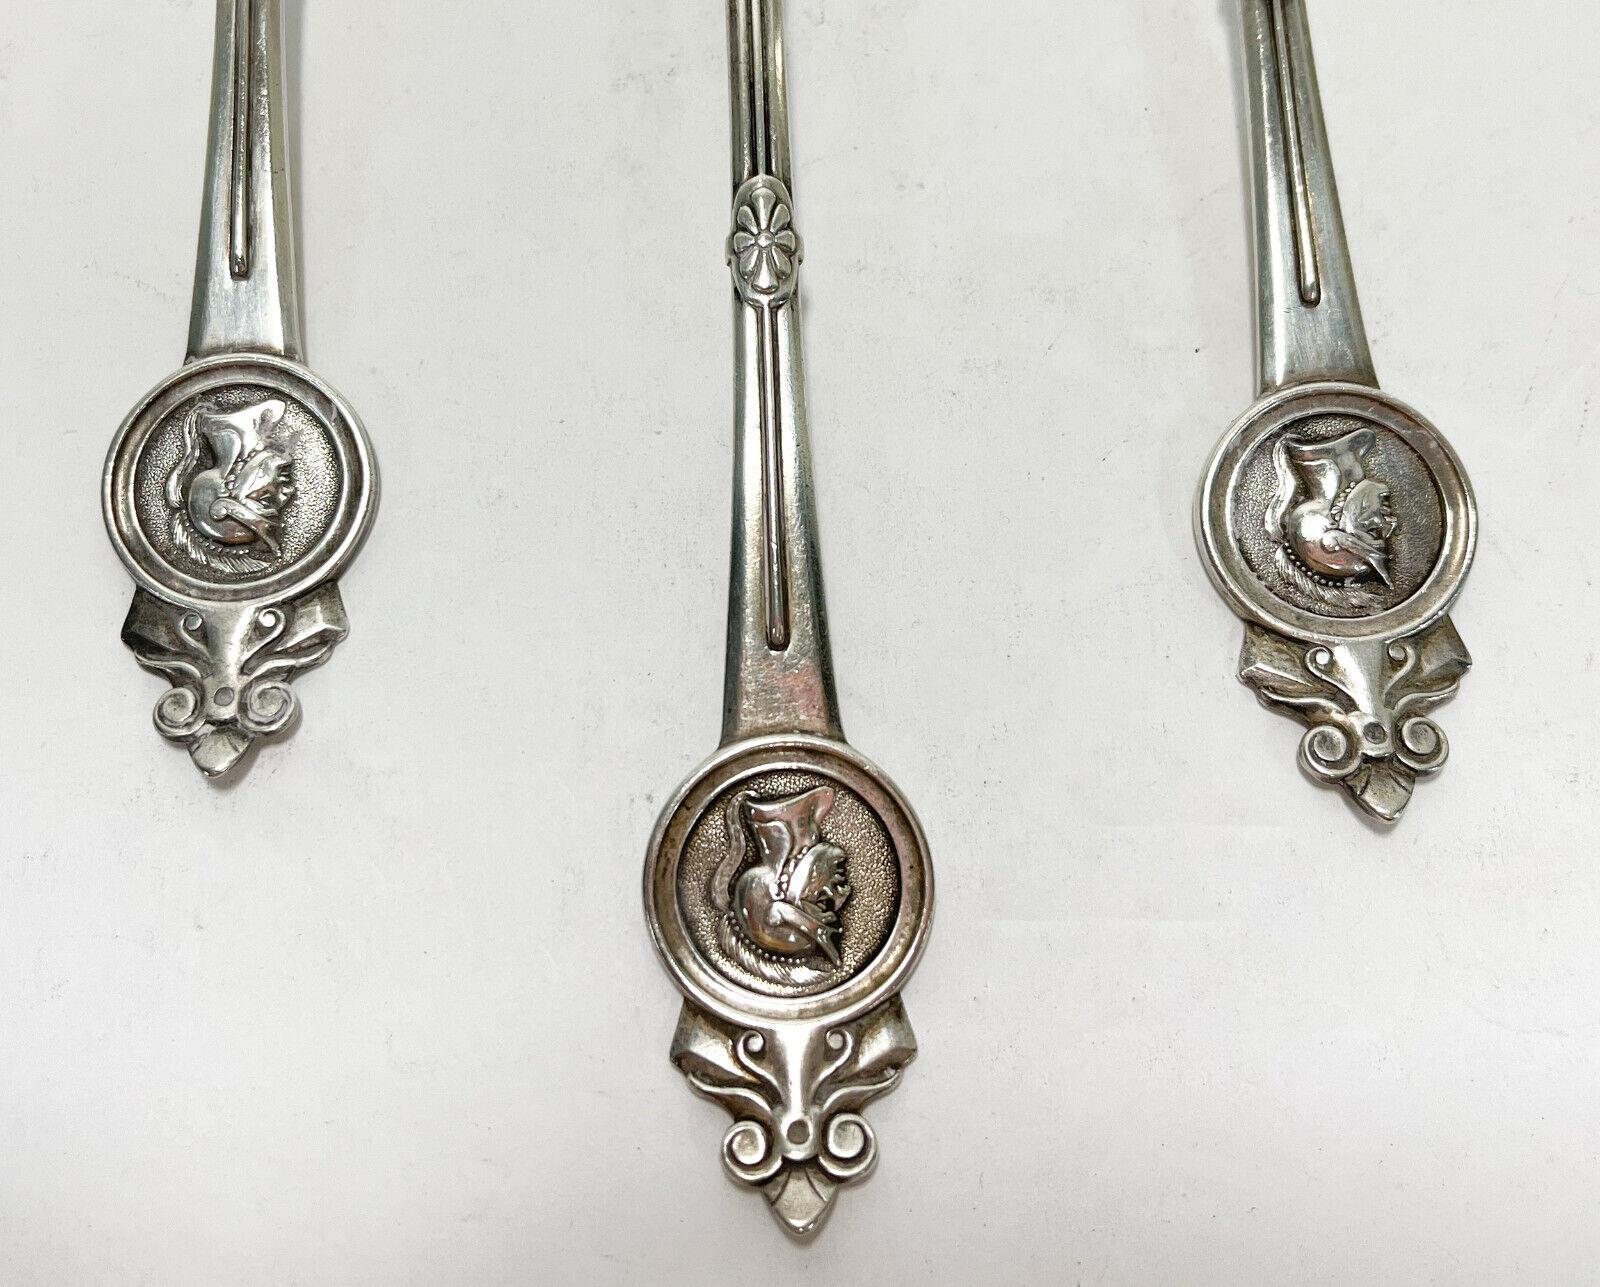 7 Gorham sterling silver medallion 8.5 inch tablespoons forks, Late 19th Century. Etched flowers with an etched warrior figure to the finial. Gorham hallmark to the verso handle.

Additional Information: 
Type: Tablespoons
Weight Approx., 14